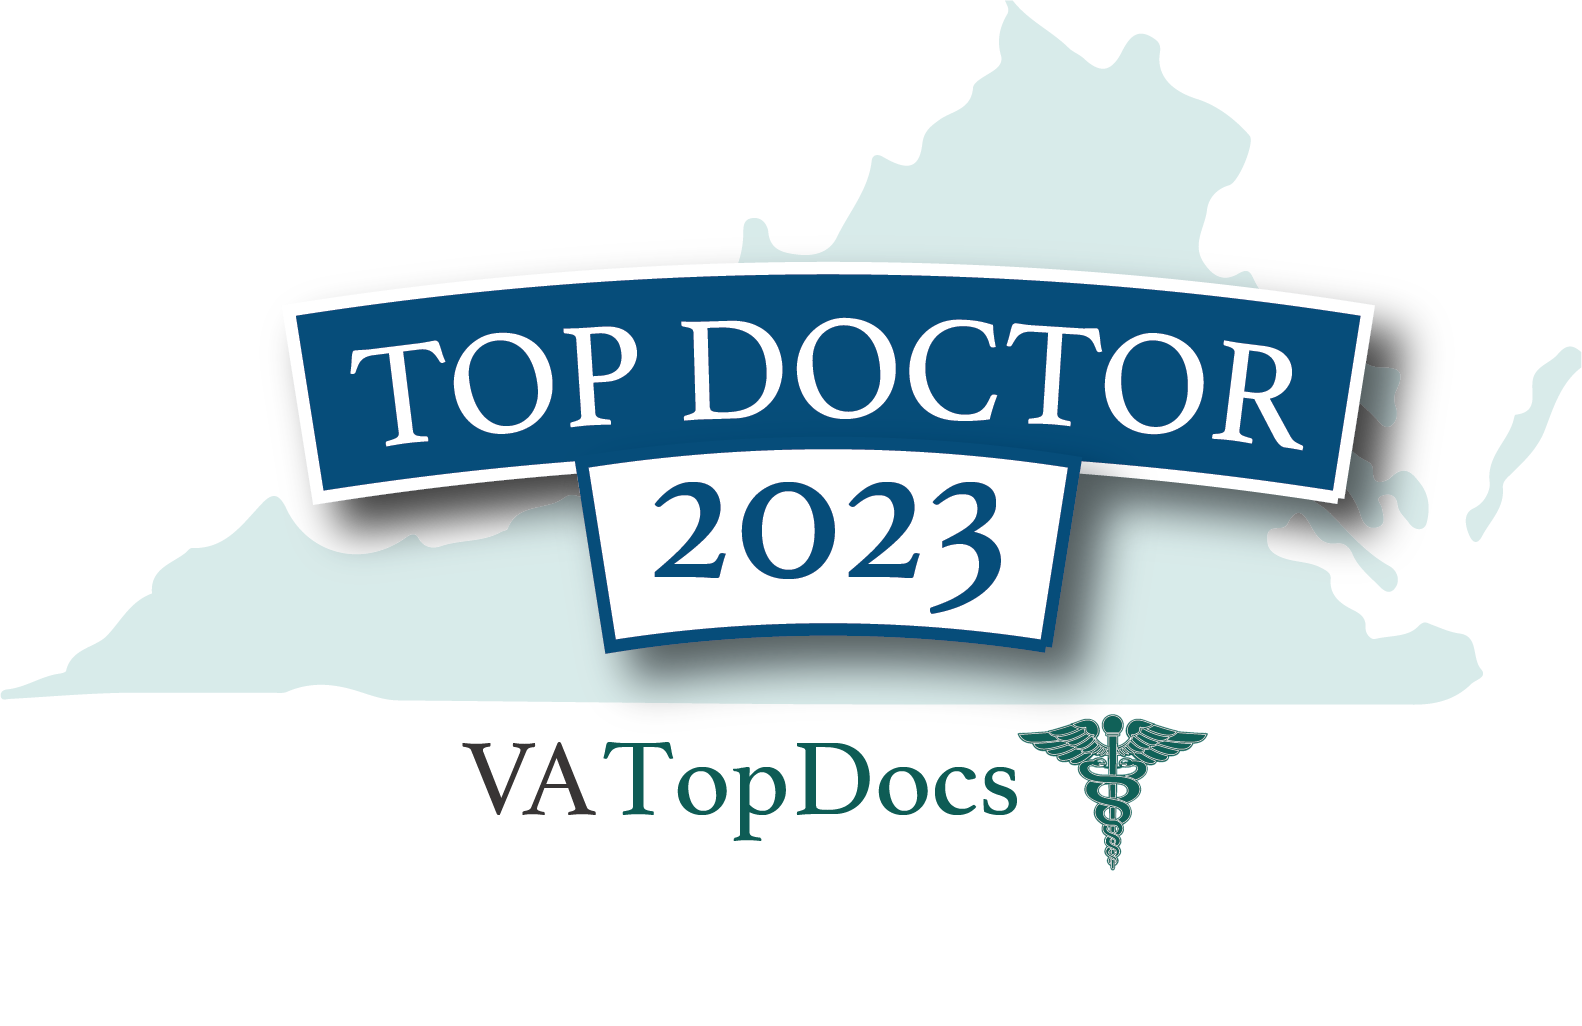 Top Doctor 2023 Text Over Virginia State Outline with VA Top Docs Logo